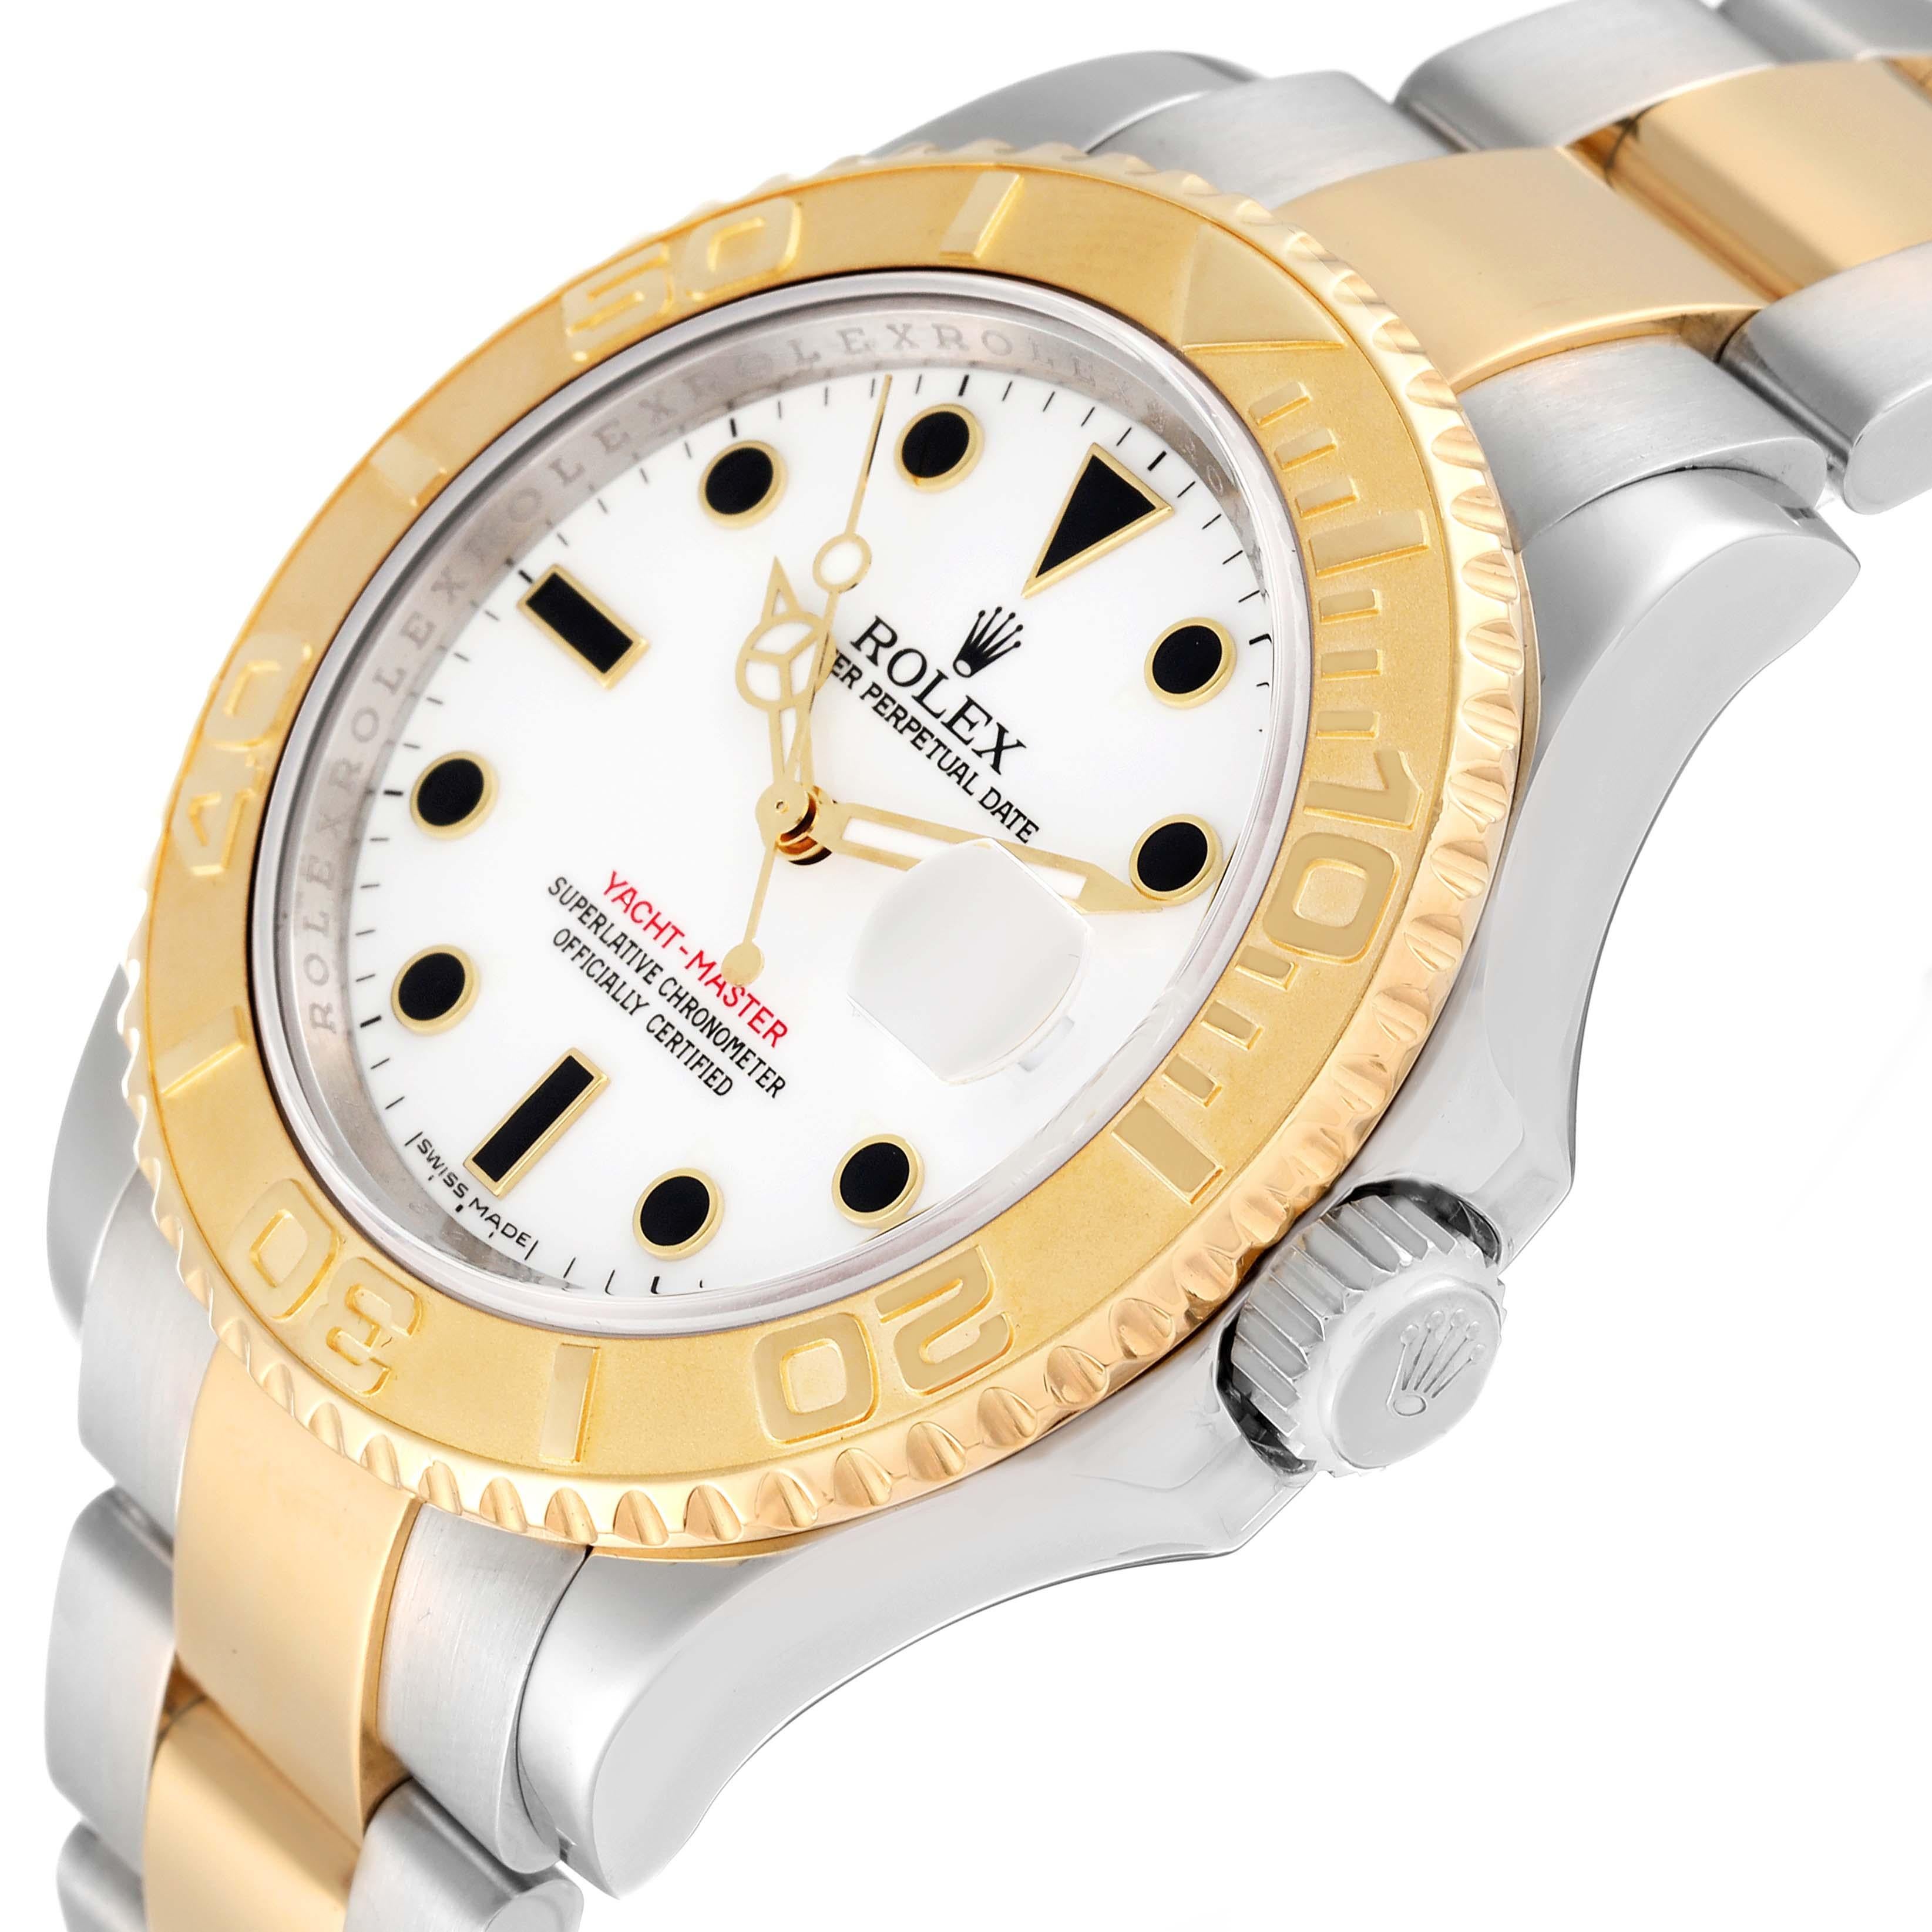 Rolex Yachtmaster Steel Yellow Gold White Dial Mens Watch 16623 Box Card 1